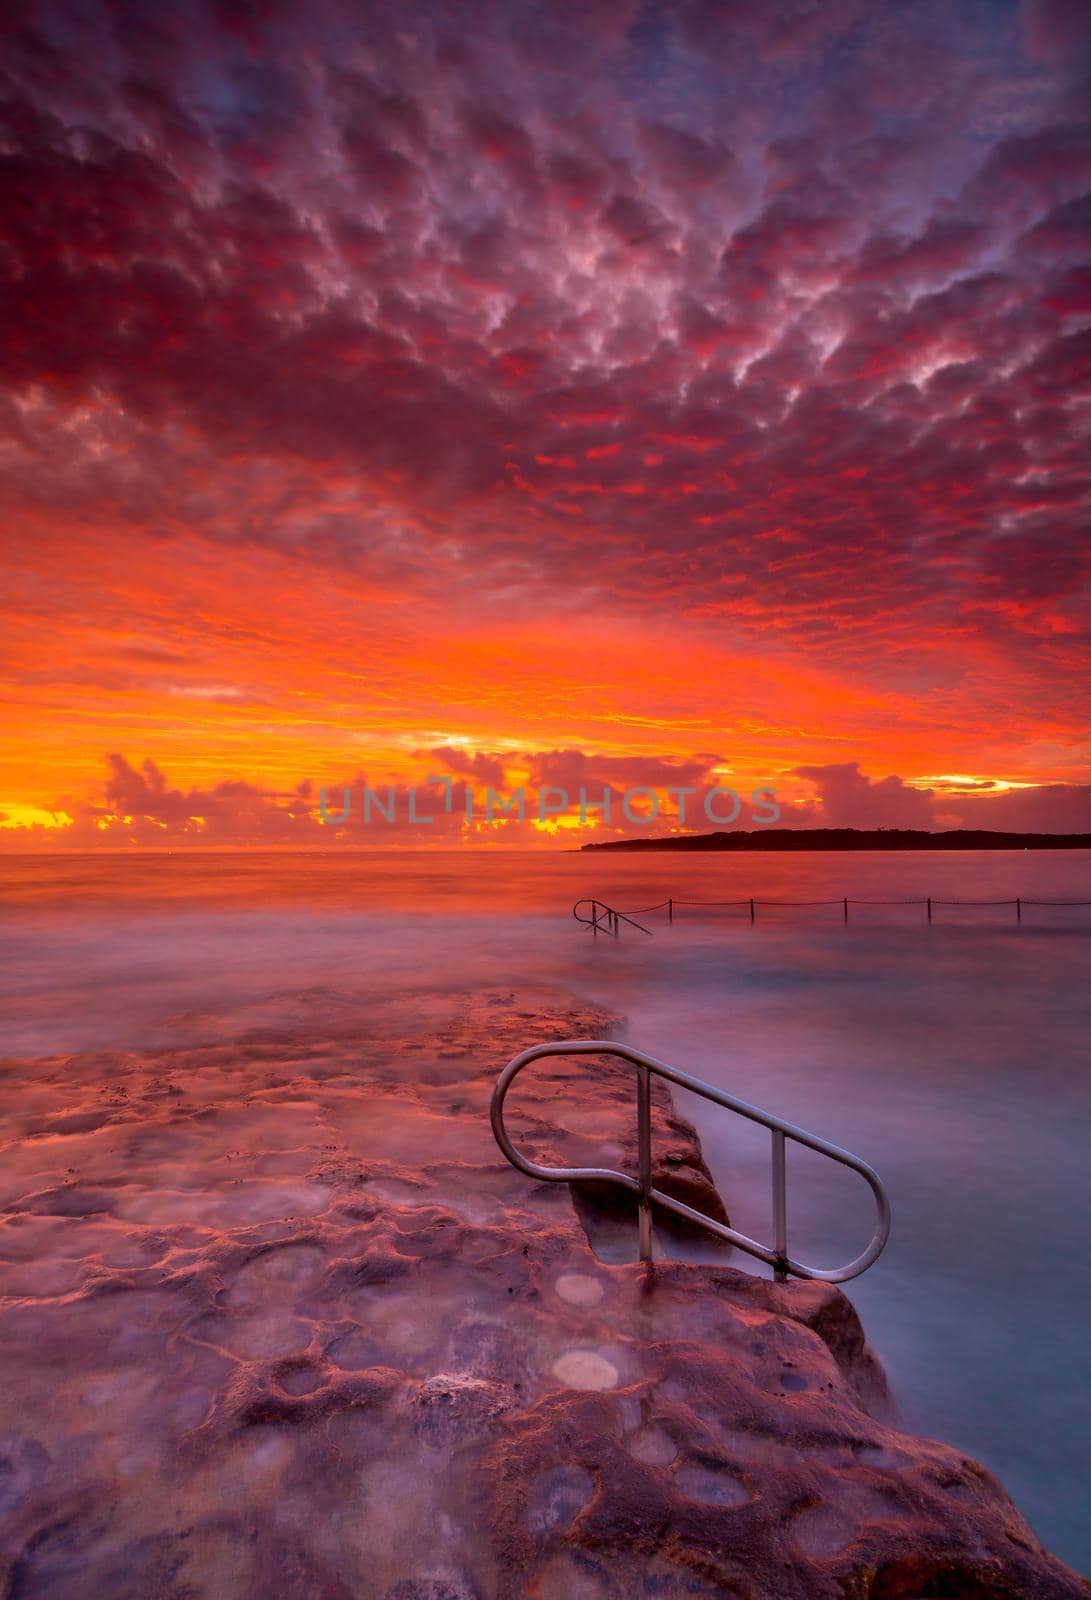 Rich red vibrant and stunning sunrise over rock pool and ocean in Cronulla, Australia